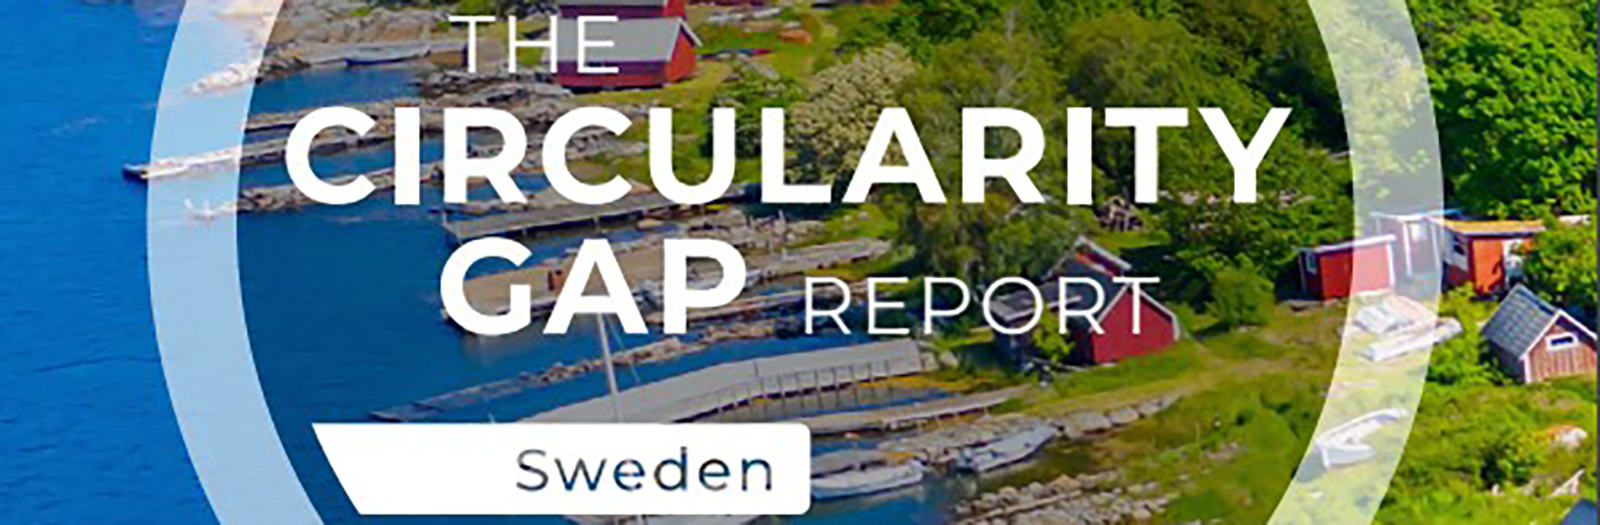 The Circularity Gap Report Sweden cover